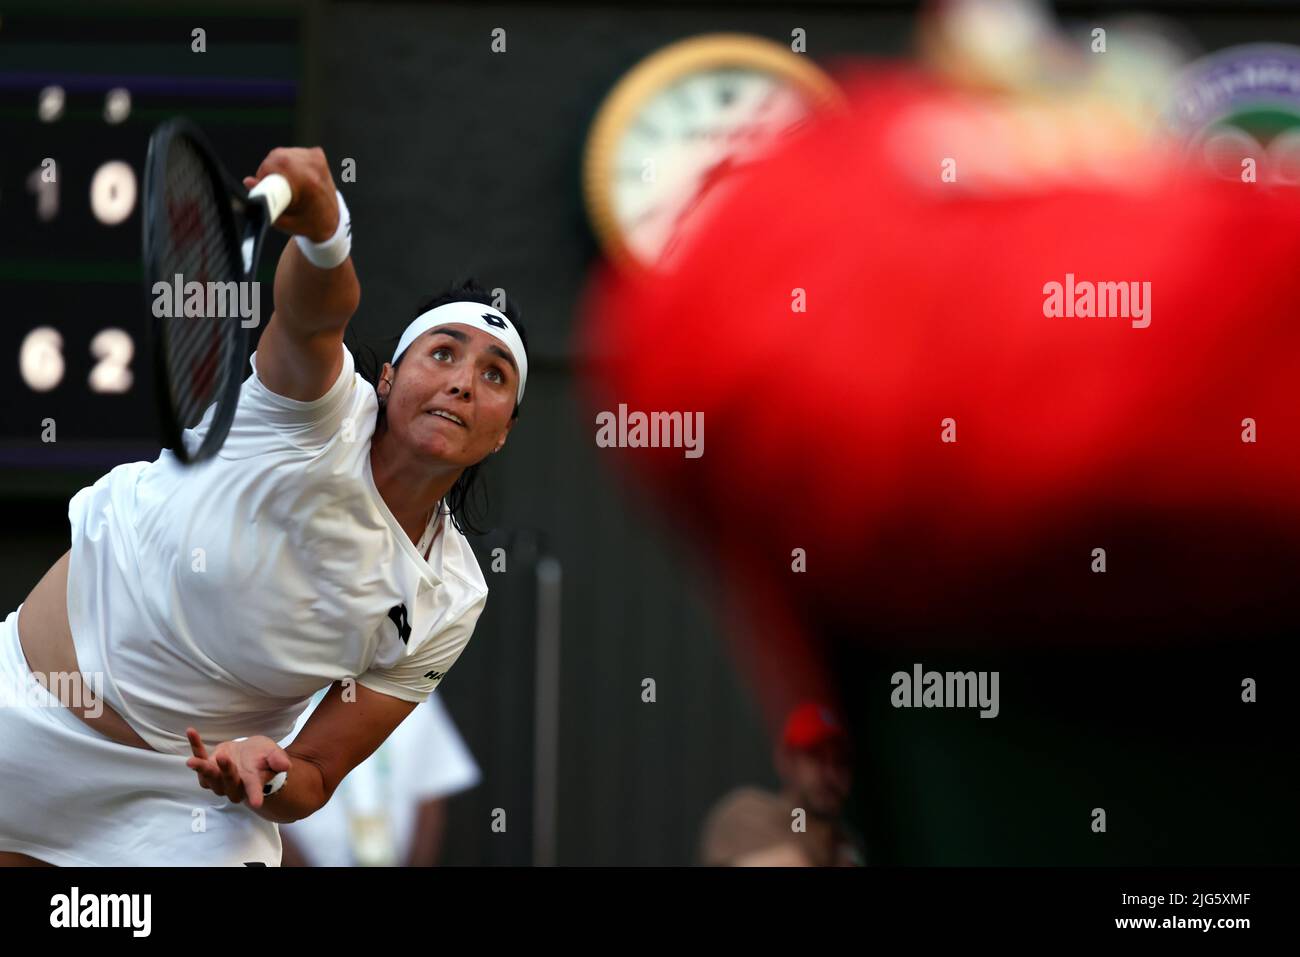 5 July 2022, All England Lawn Tennis Club, Wimbledon, London, United Kingdom:  Tunisia's Ons Jabeur serves to Marie Bouzkova of the Czech Republic during their quarterfinal match at Wimbledon today.  Jabeur won the match to advance to the semi finals. Stock Photo